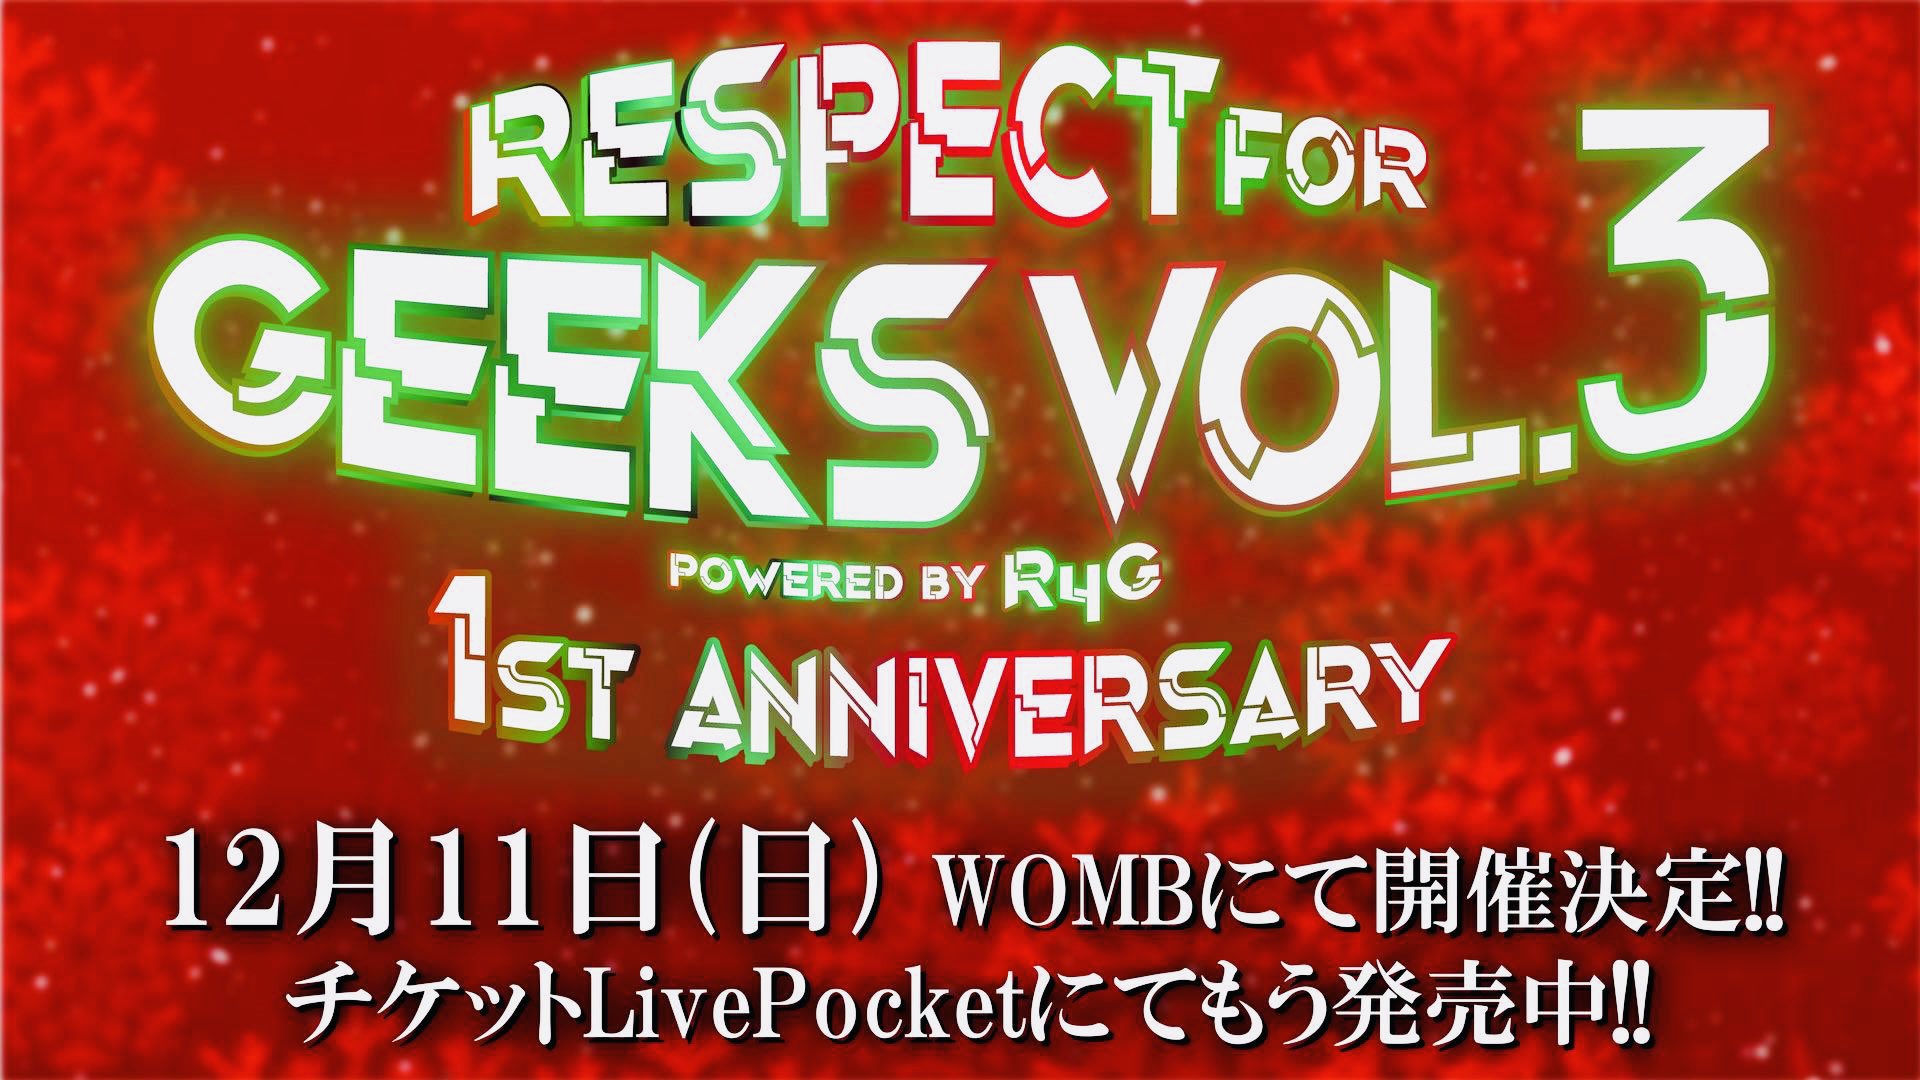 RESPECT FOR GEEKS vol.3 -1st Anniversary- powered by #R4G